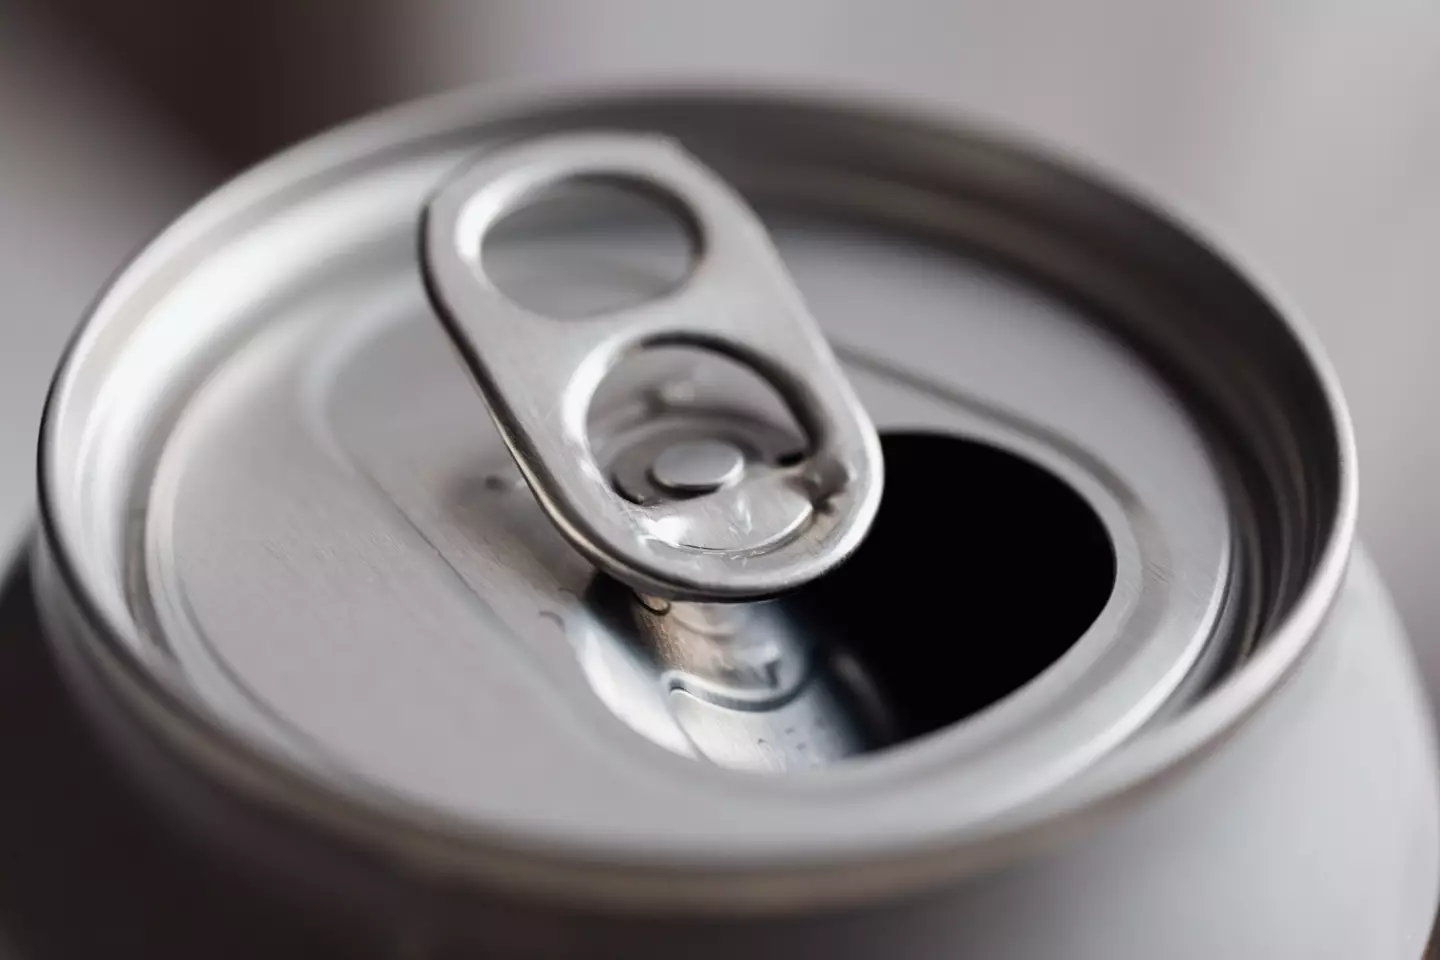 IARC has classified the chemical found in Diet sodas in Group 2B for cancer hazards.